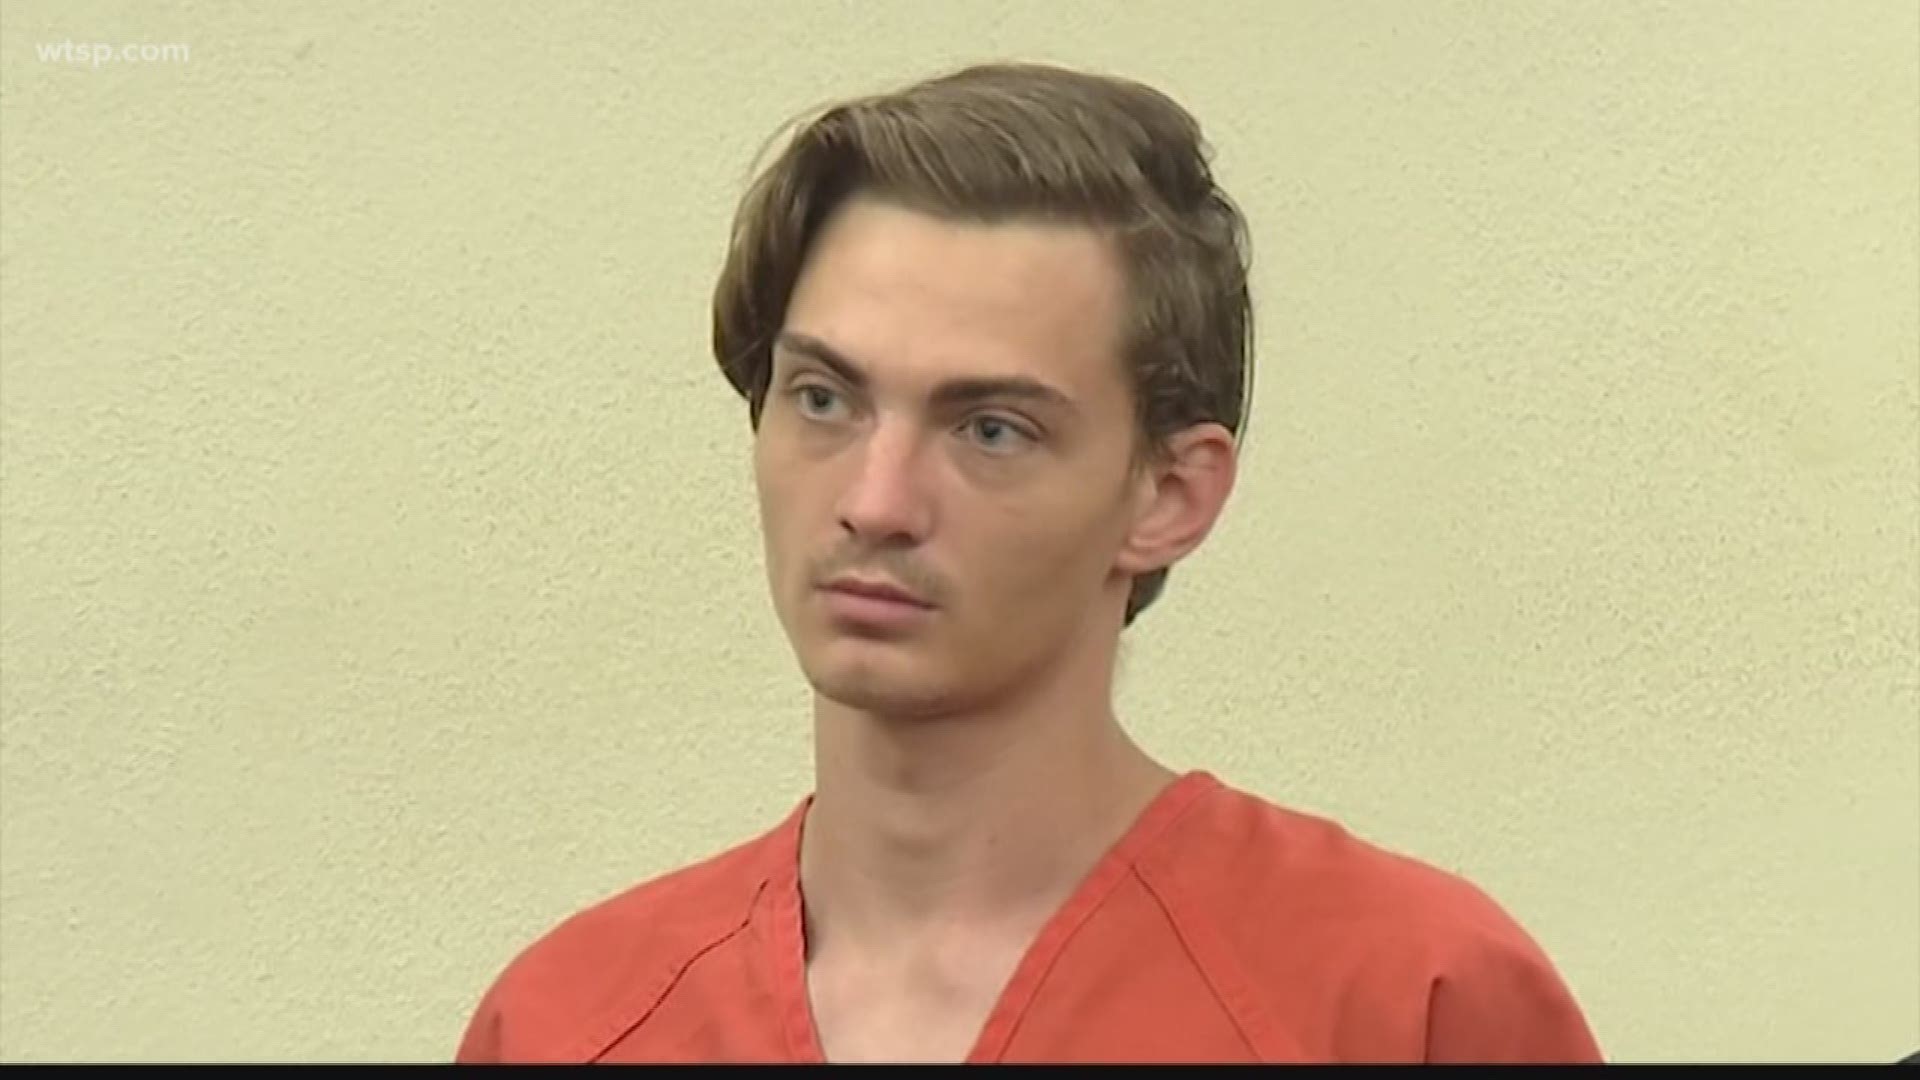 Volusia County deputies said they arrested a Daytona Beach man after he threatened a mass shooting.

Deputies said Tristan Scott Wix, 25, sent multiple text messages with details about shooting as many people as he could in a large crowd.